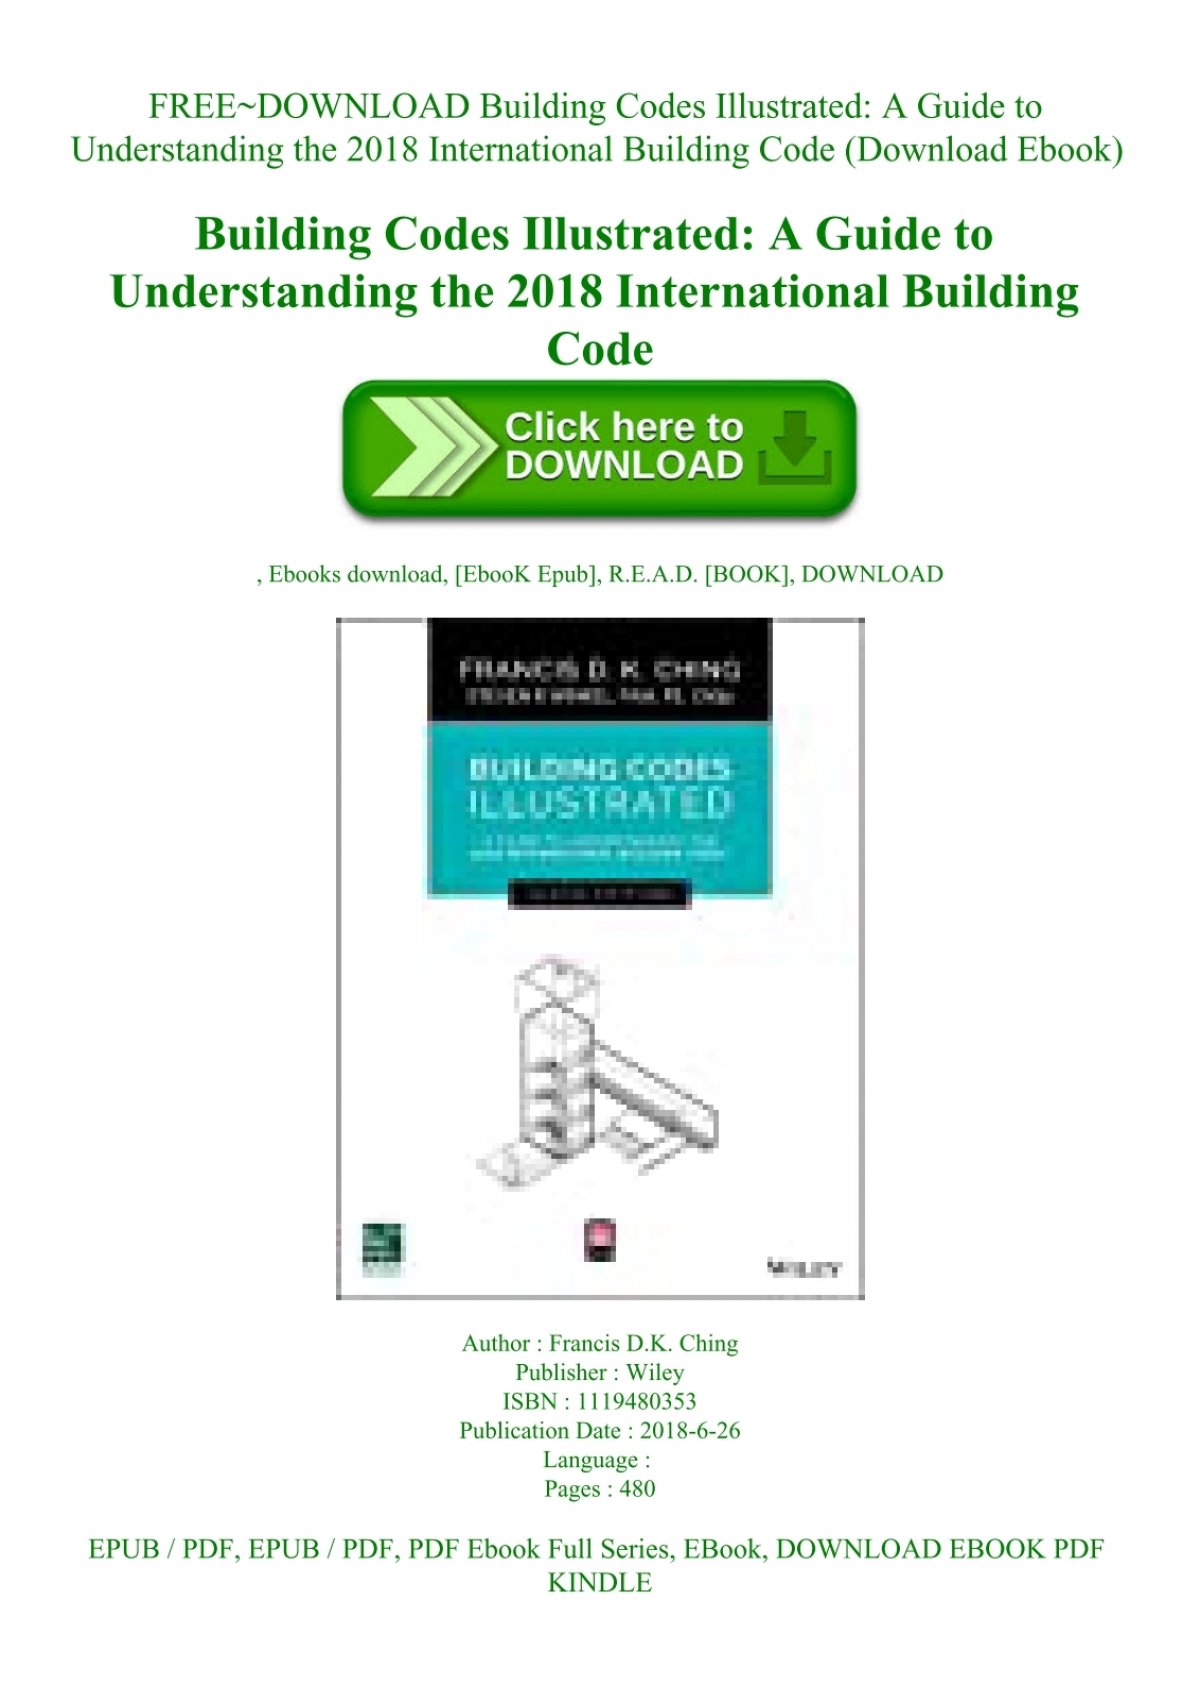 building codes illustrated pdf free download